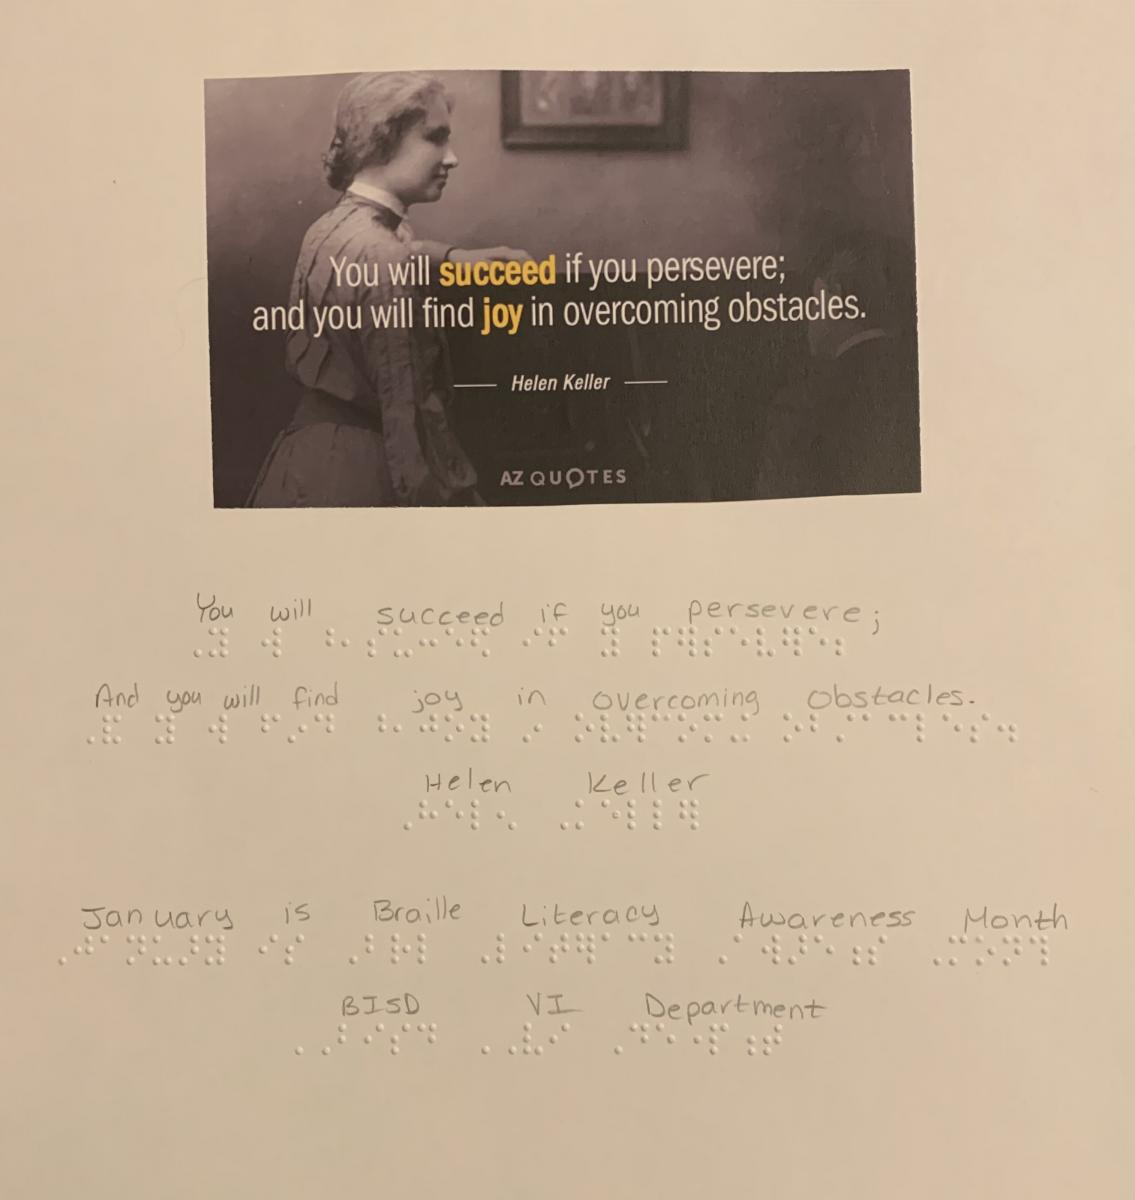 Photo of Helen Keller with quote in print and braille